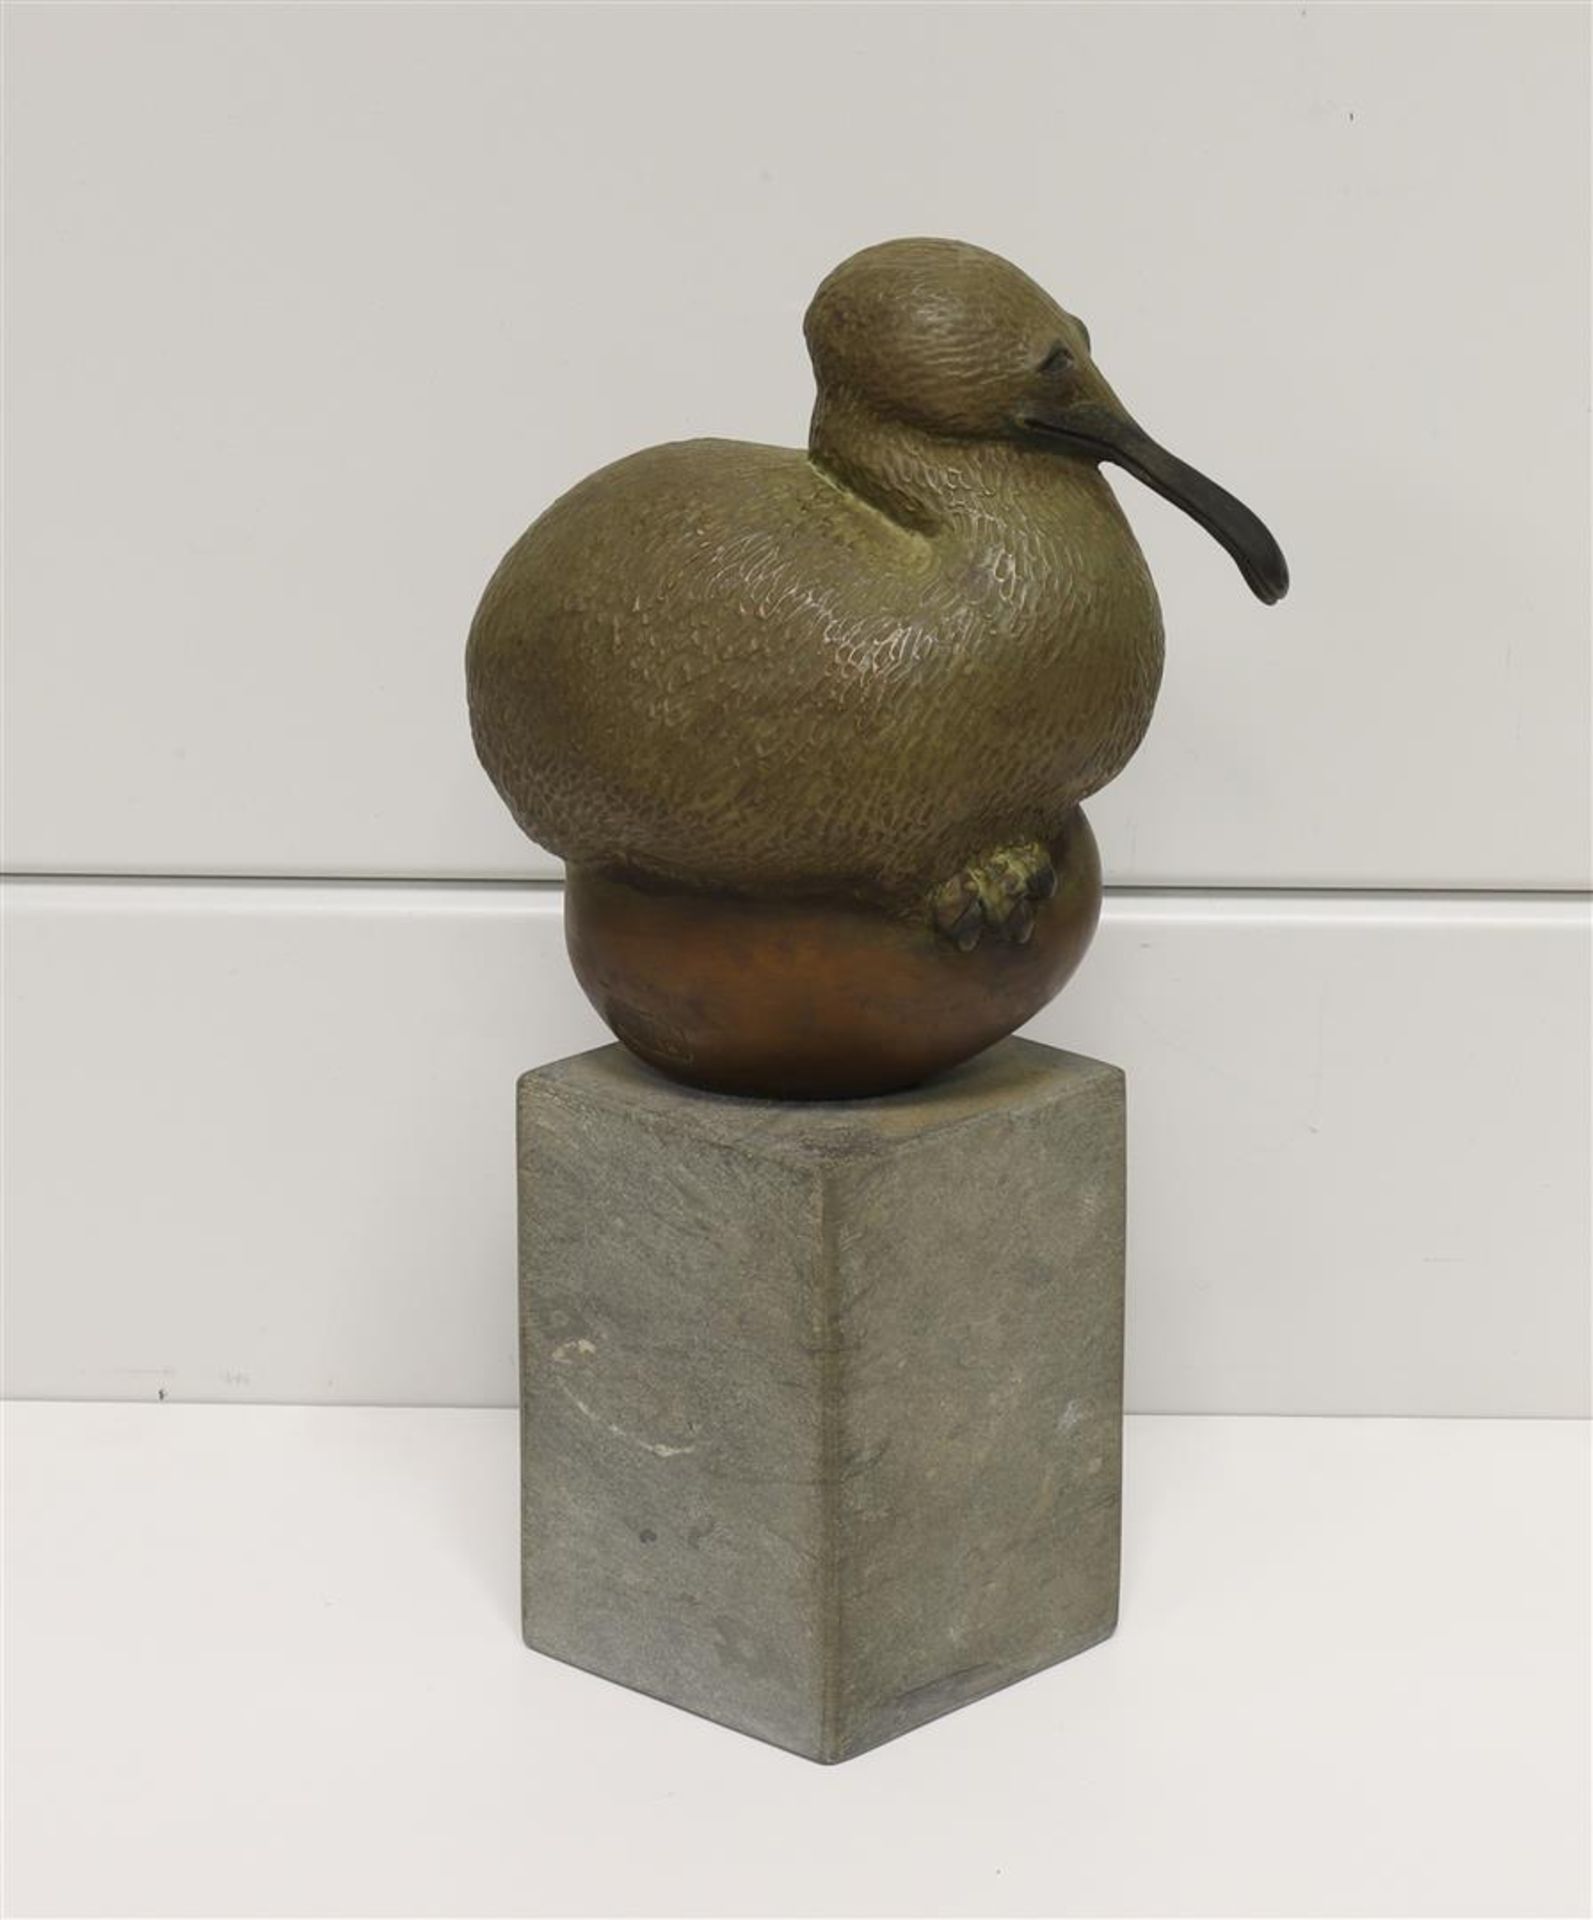 Visser, Suzan (Maarsbergen 1967) A green and brown patinated dodo on an egg